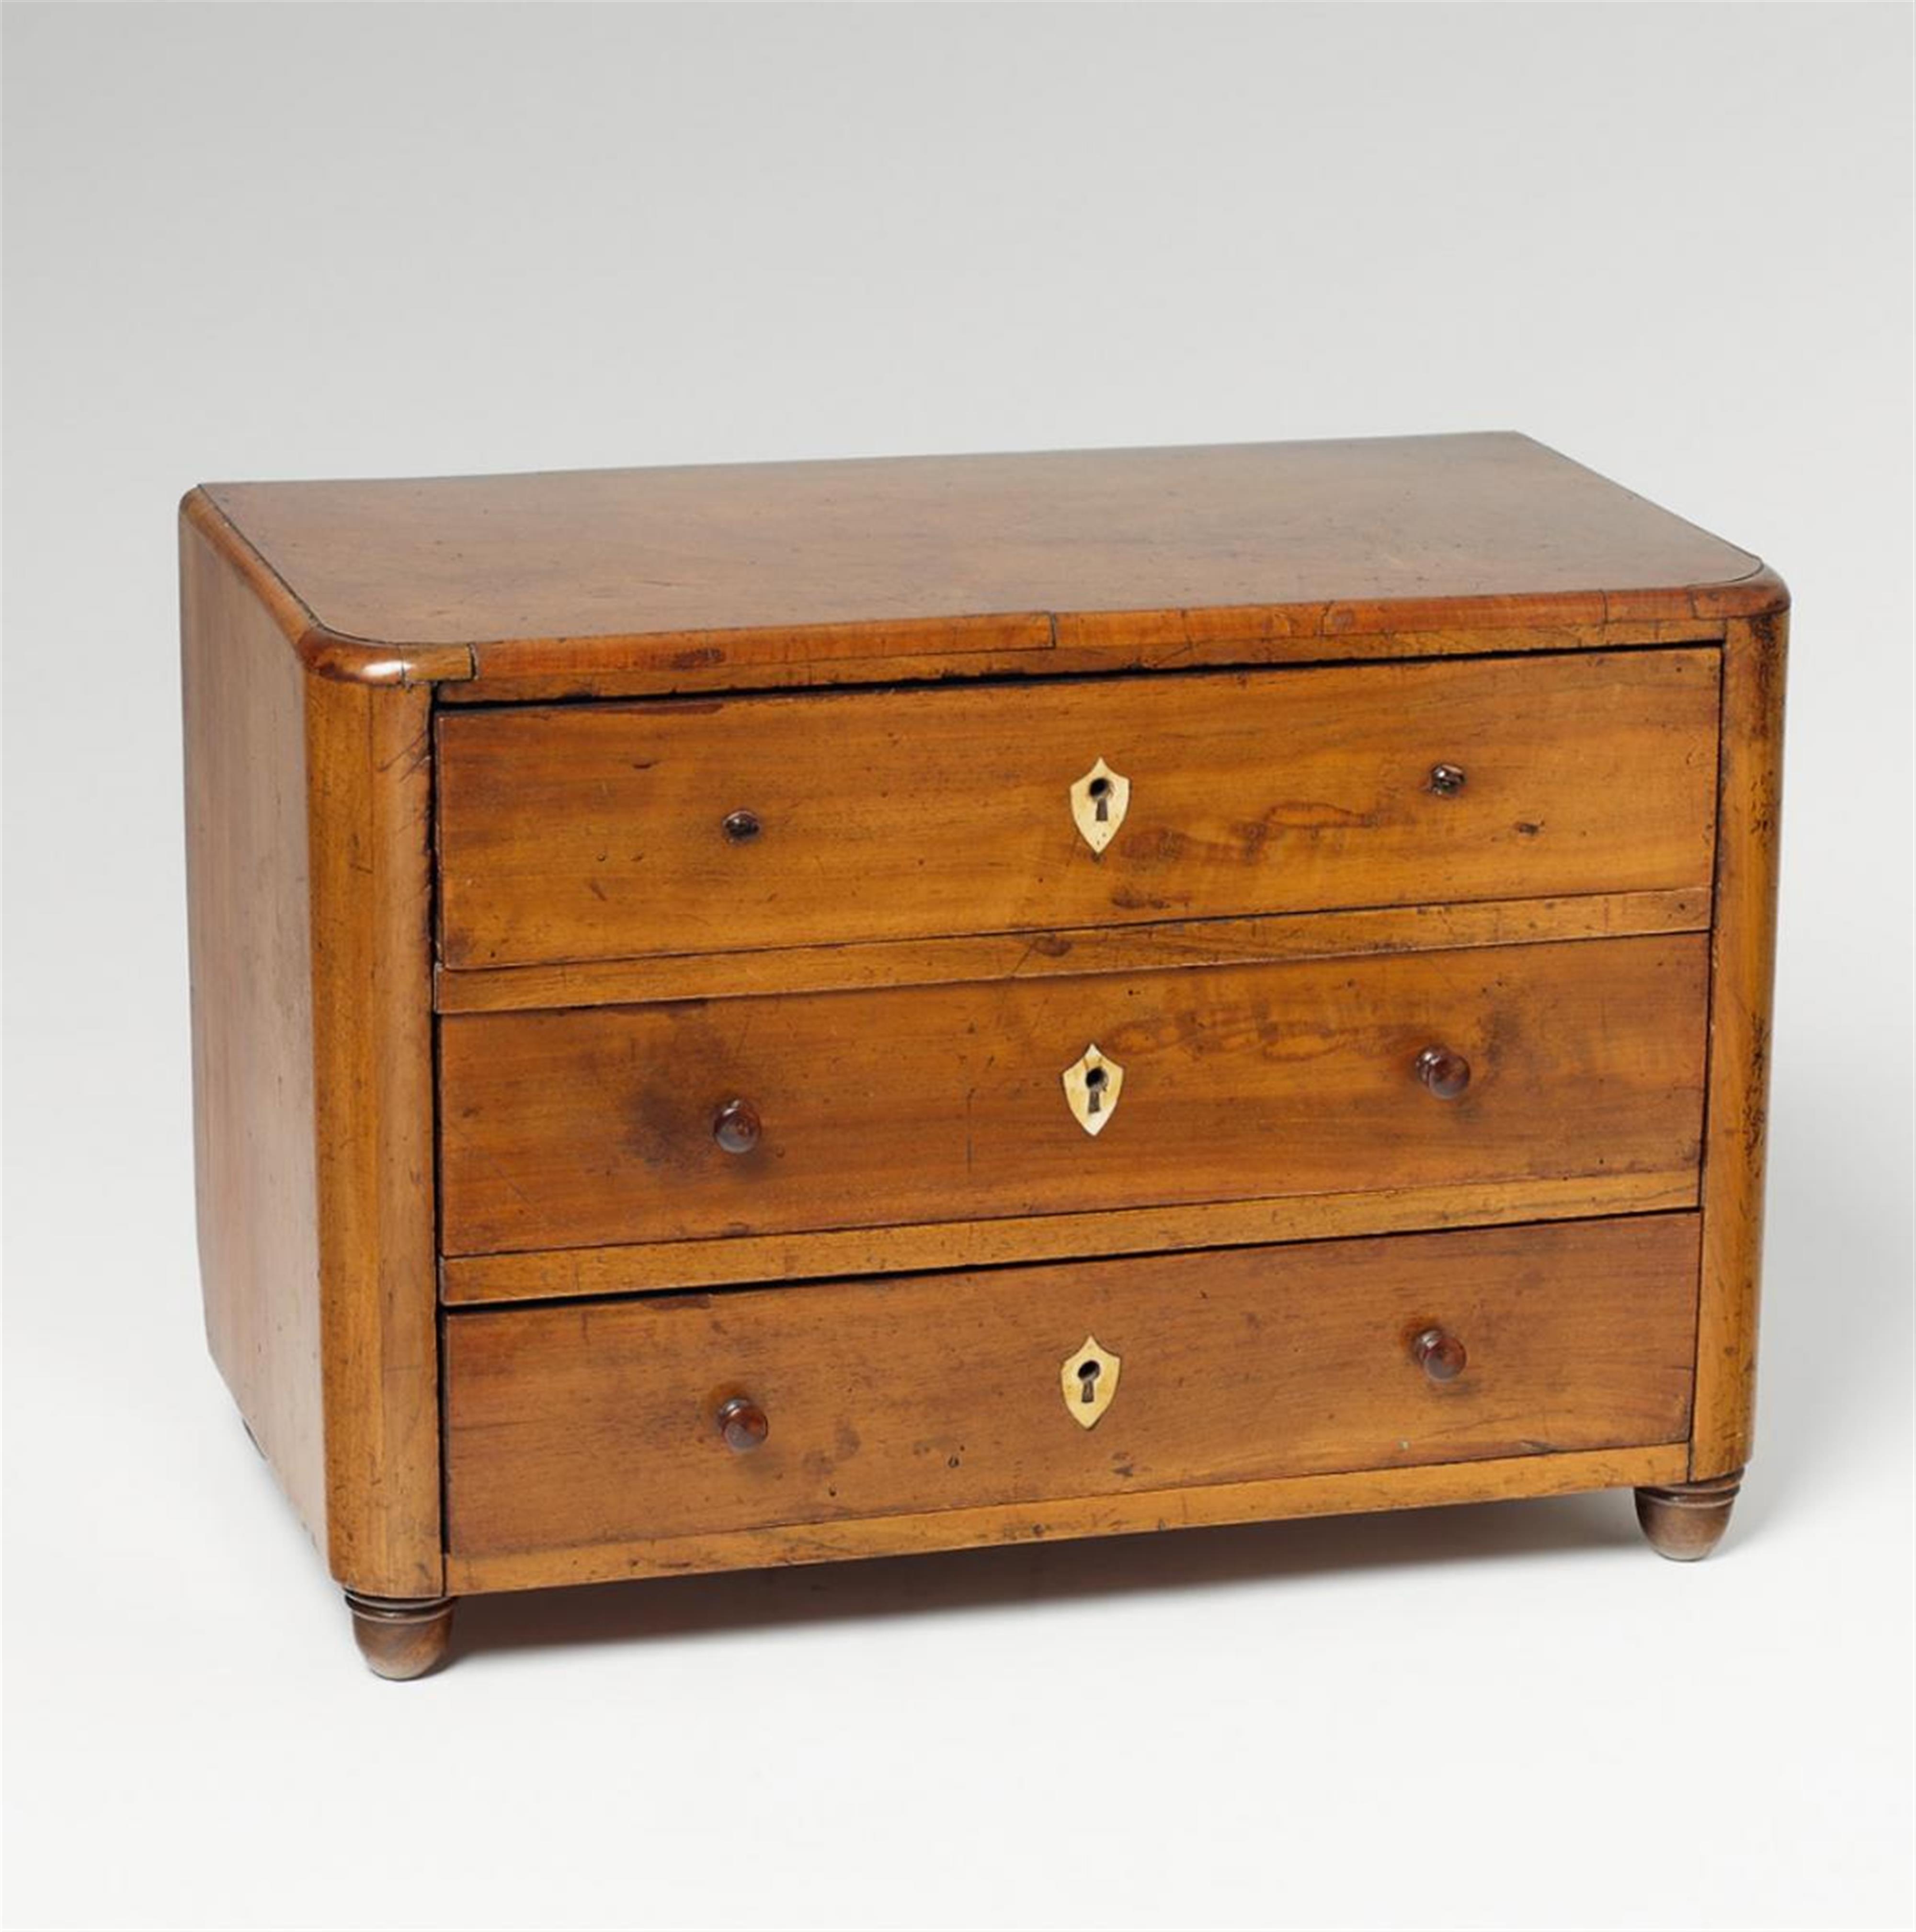 A small German Biedermeier style chest of drawers with bone inlays - image-1